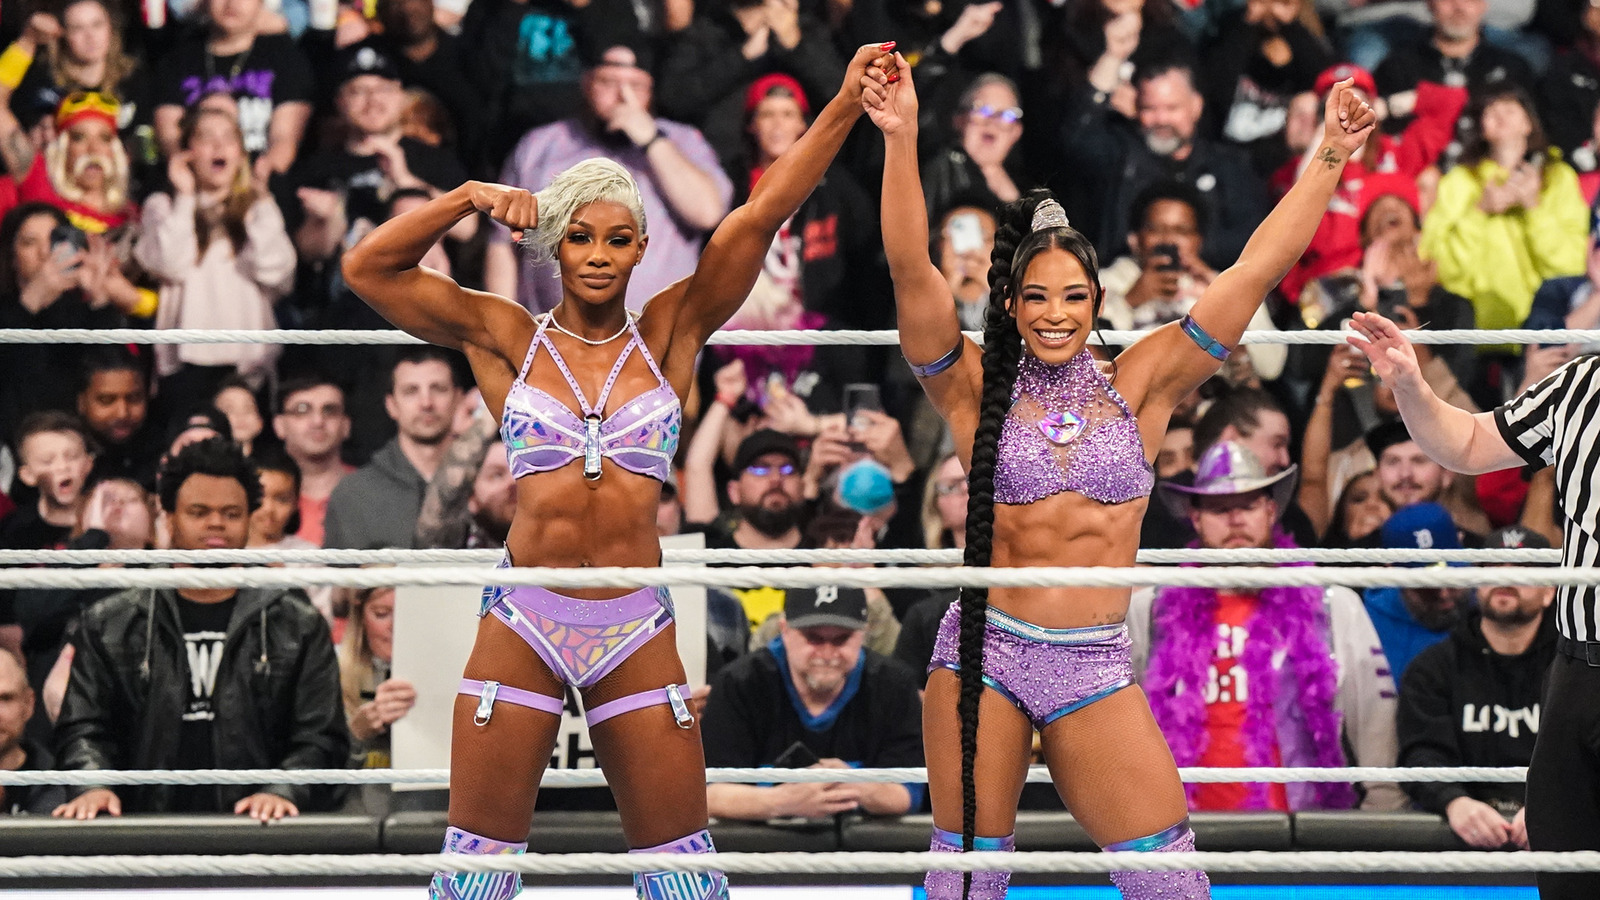 Photo: Bianca Belair Shares Backstage Pic With Fellow WWE Star Jade Cargill